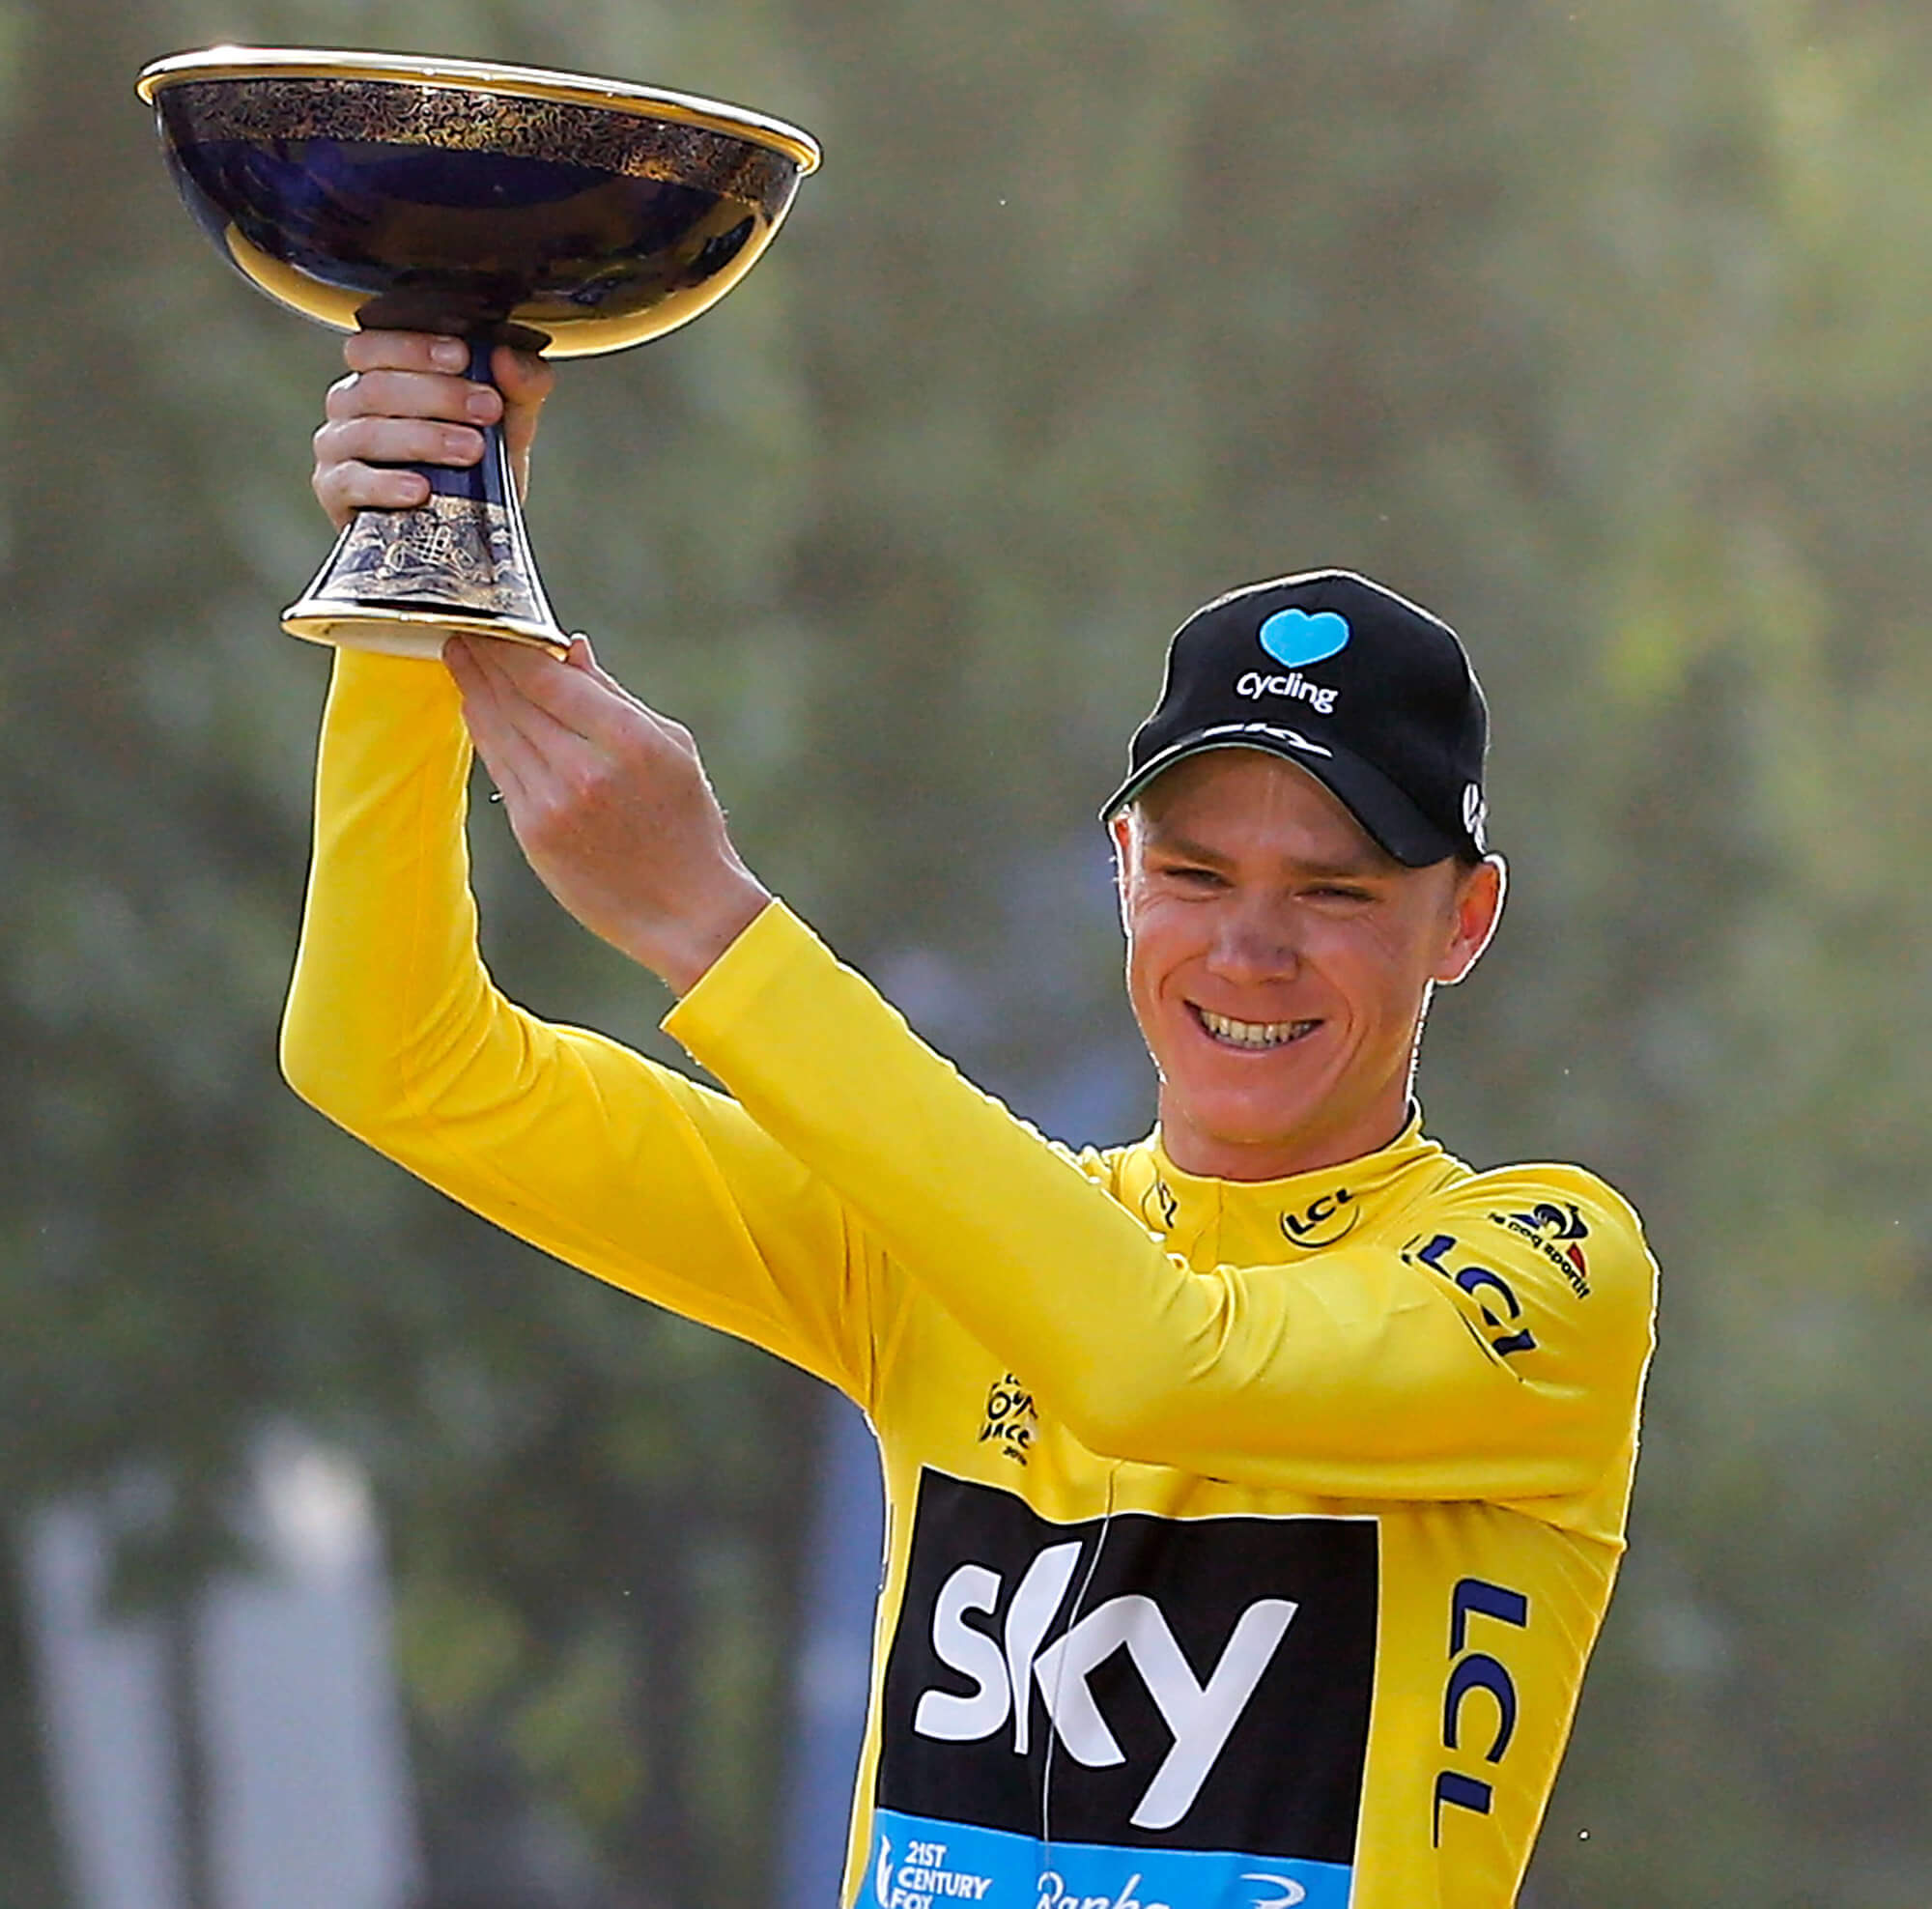 Image of Chris Froome with Tour de France trophy